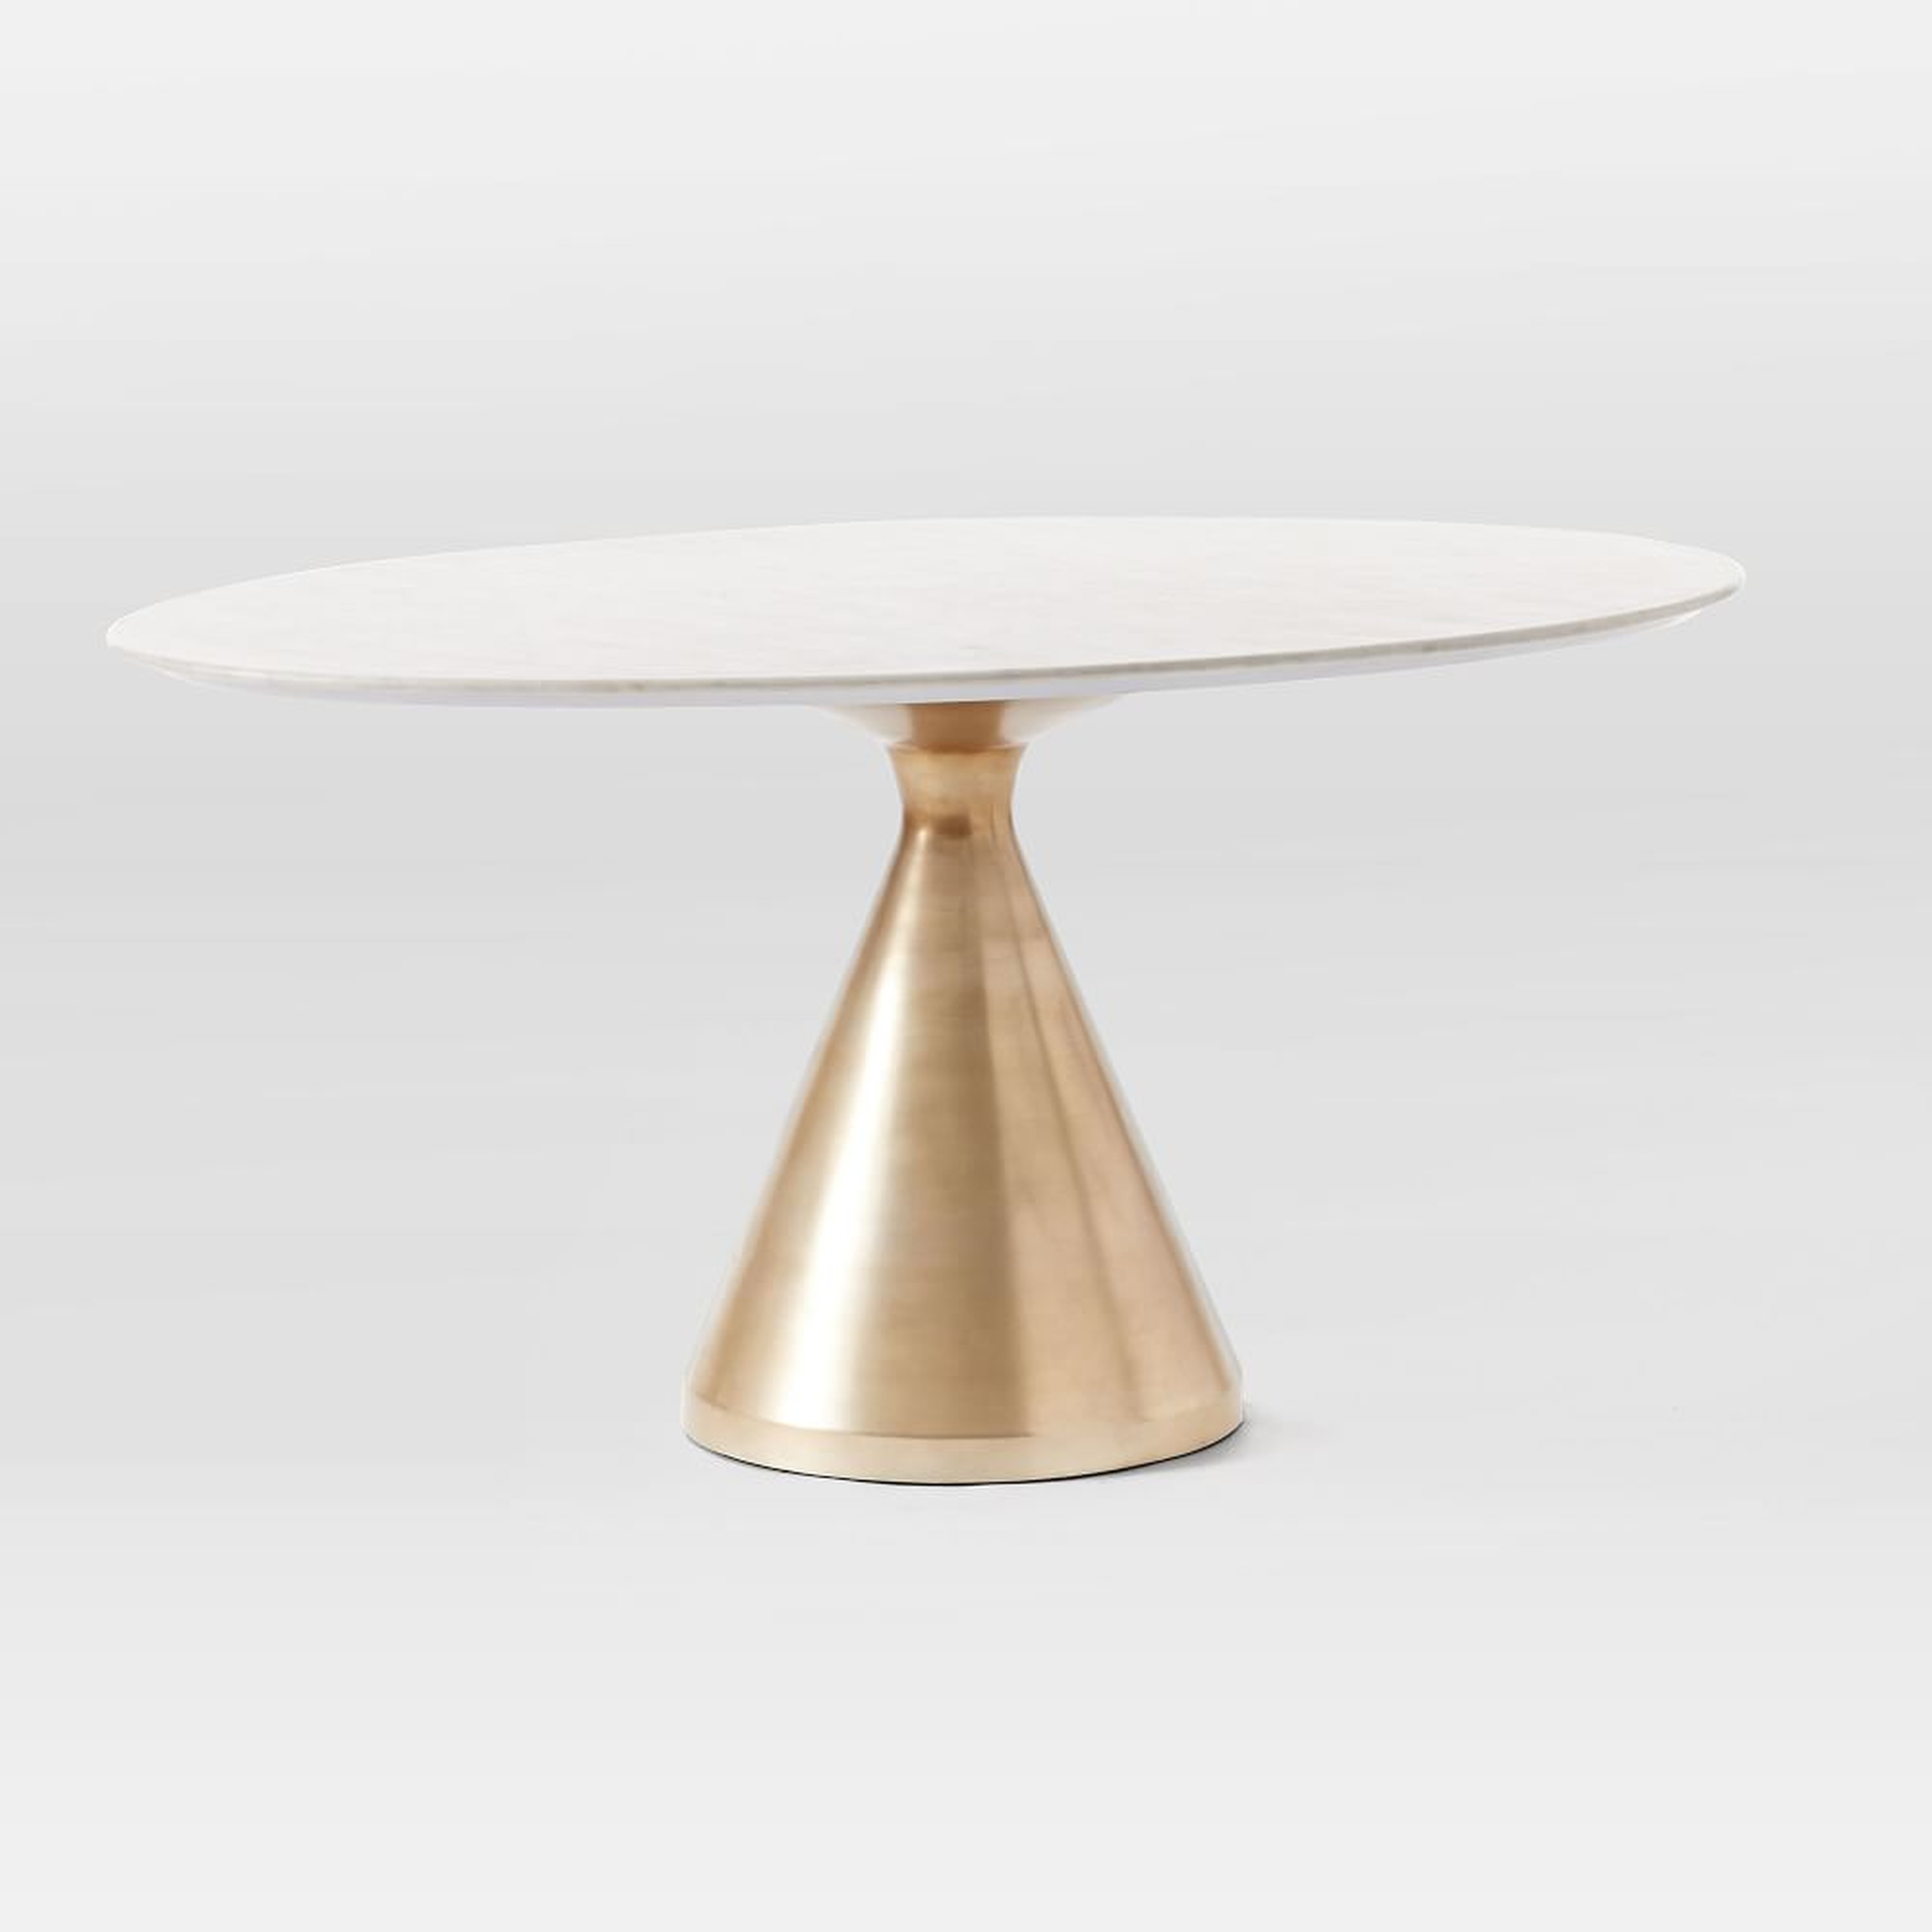 Silhouette Dining Table, Oval, 60" , White Marble, Antique Brass - West Elm